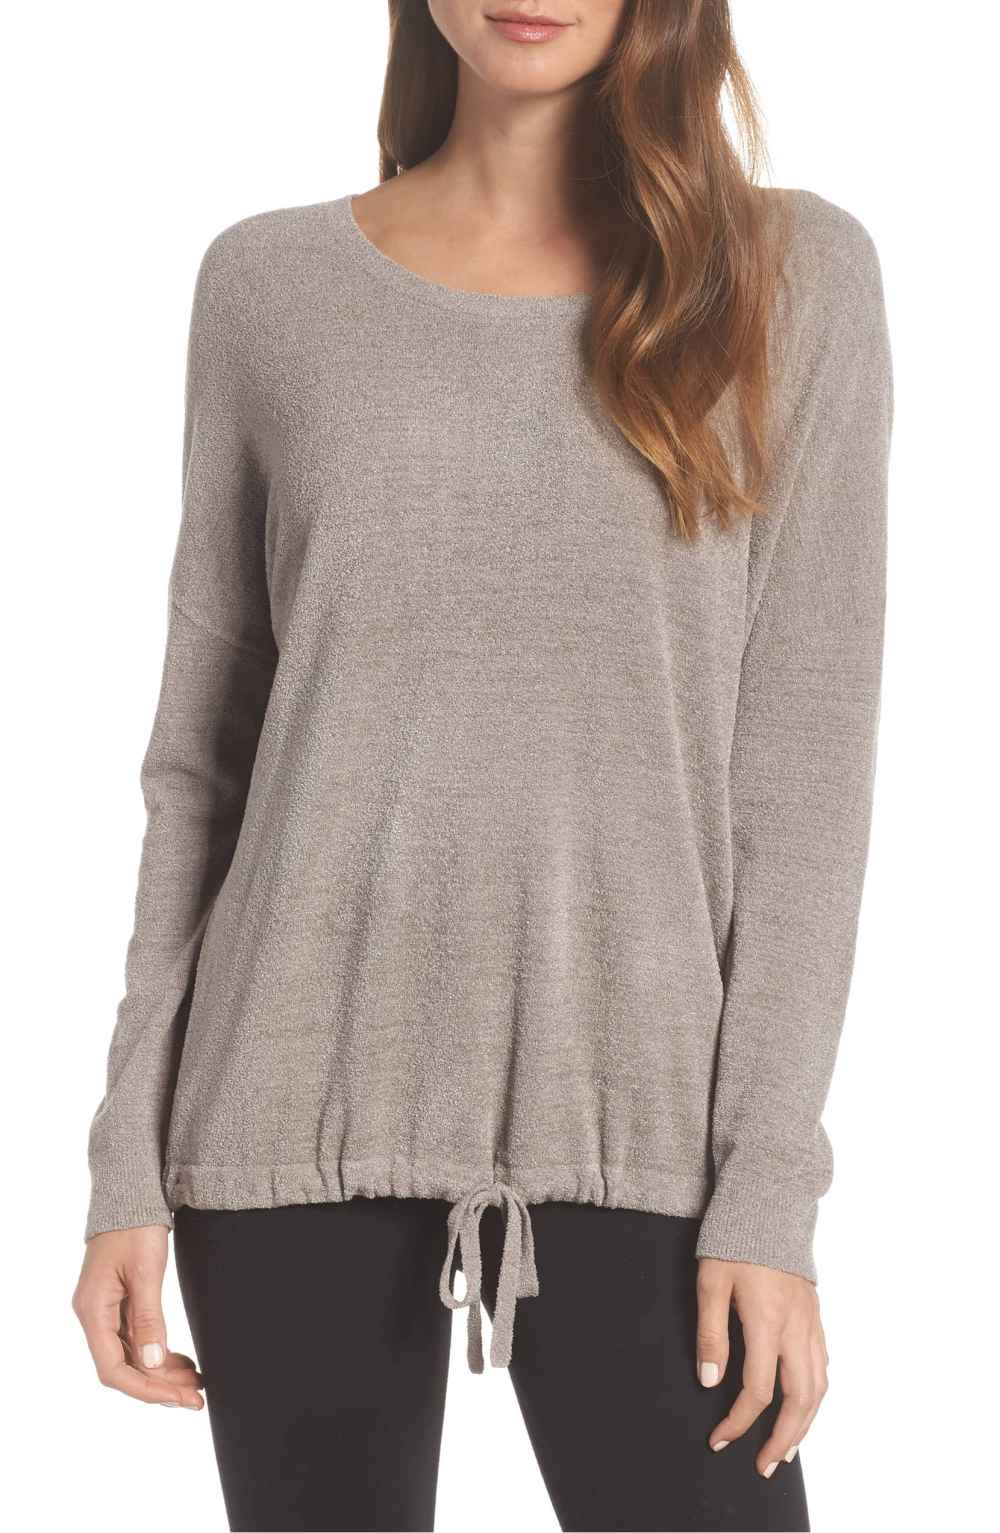 Barefoot Dreams Cozychic Ultra Lite Lounge Pullover